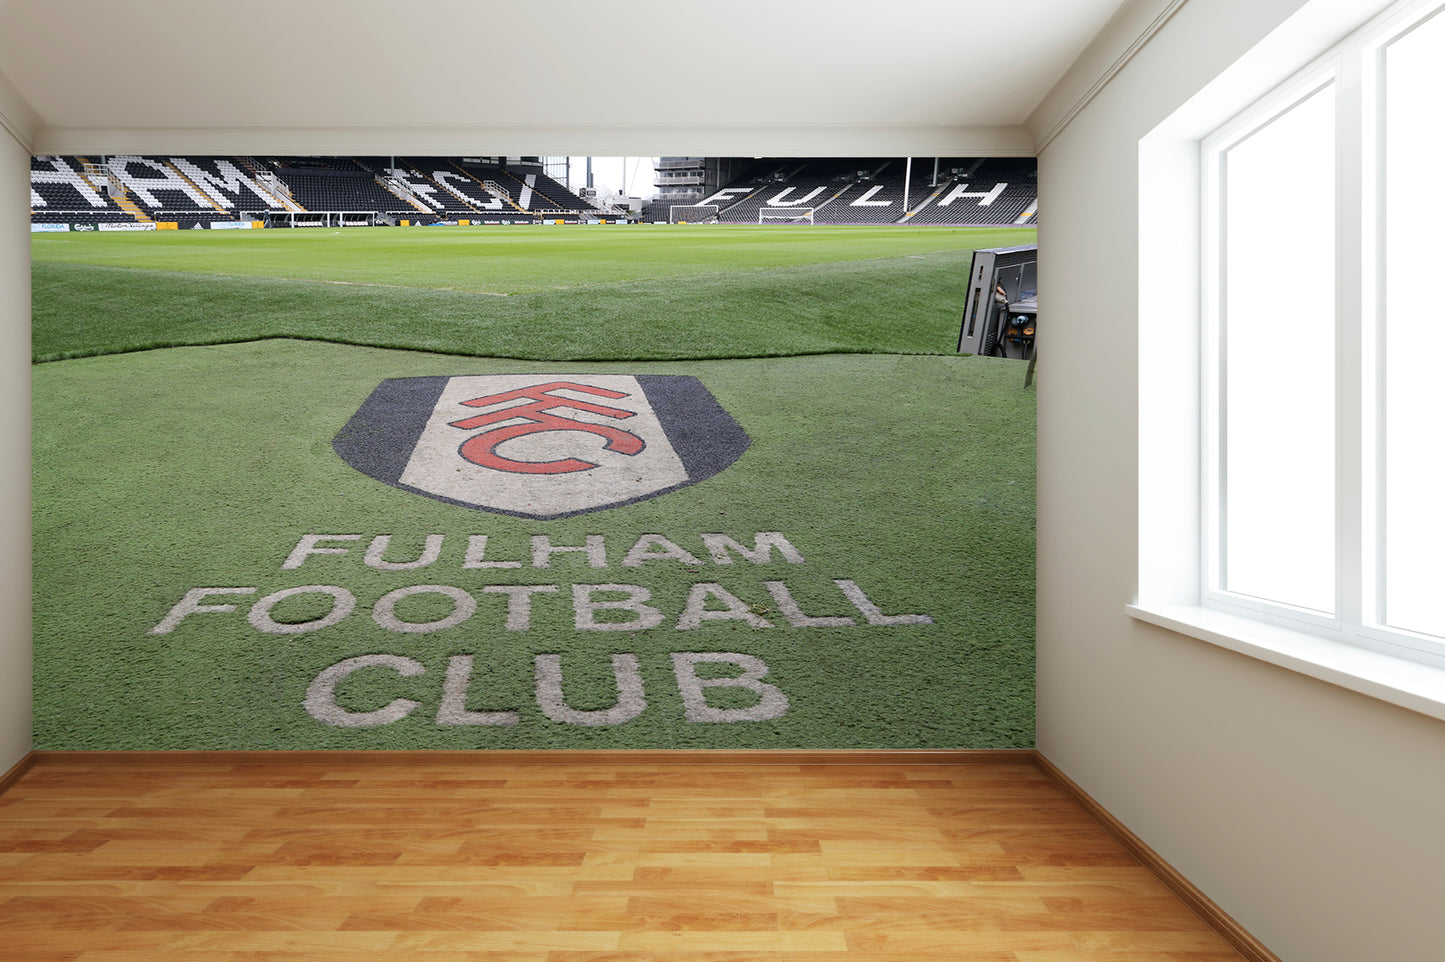 Fulham FC - Craven Cottage Stadium Full Wall Mural Pitch & Club Crest